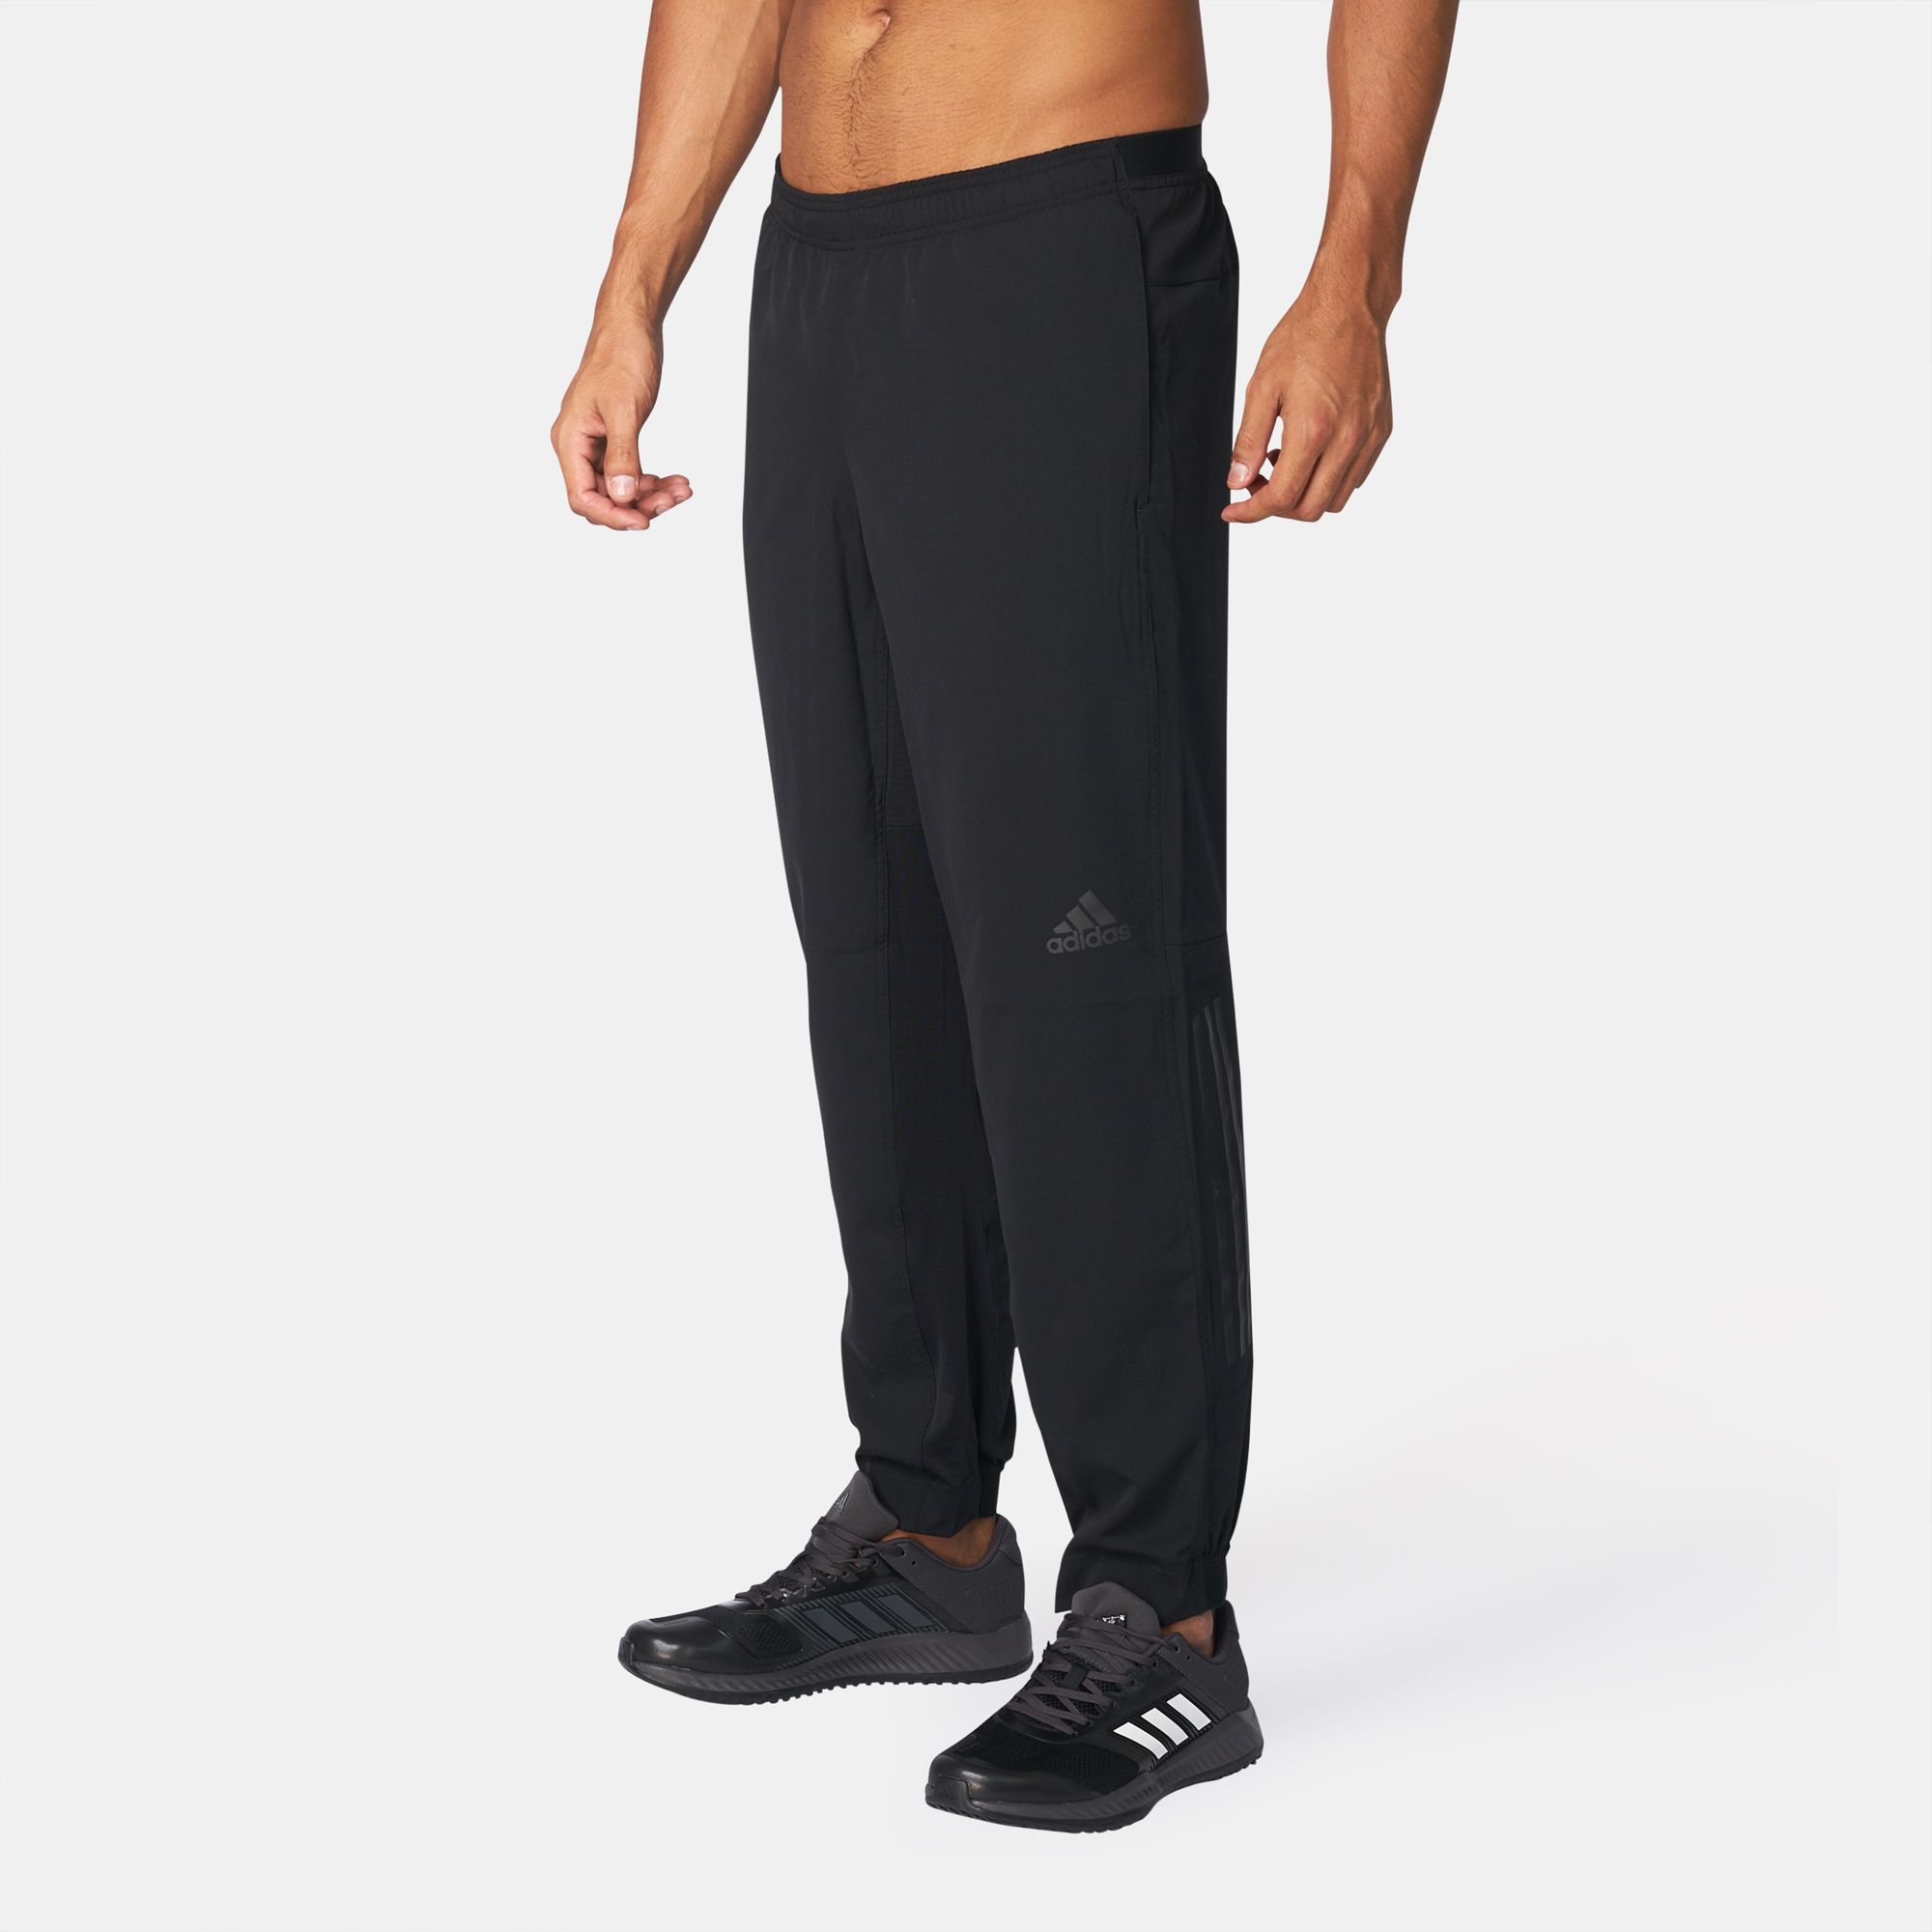 Shop Black adidas Extreme Workout Woven Training Pants for Mens by ...